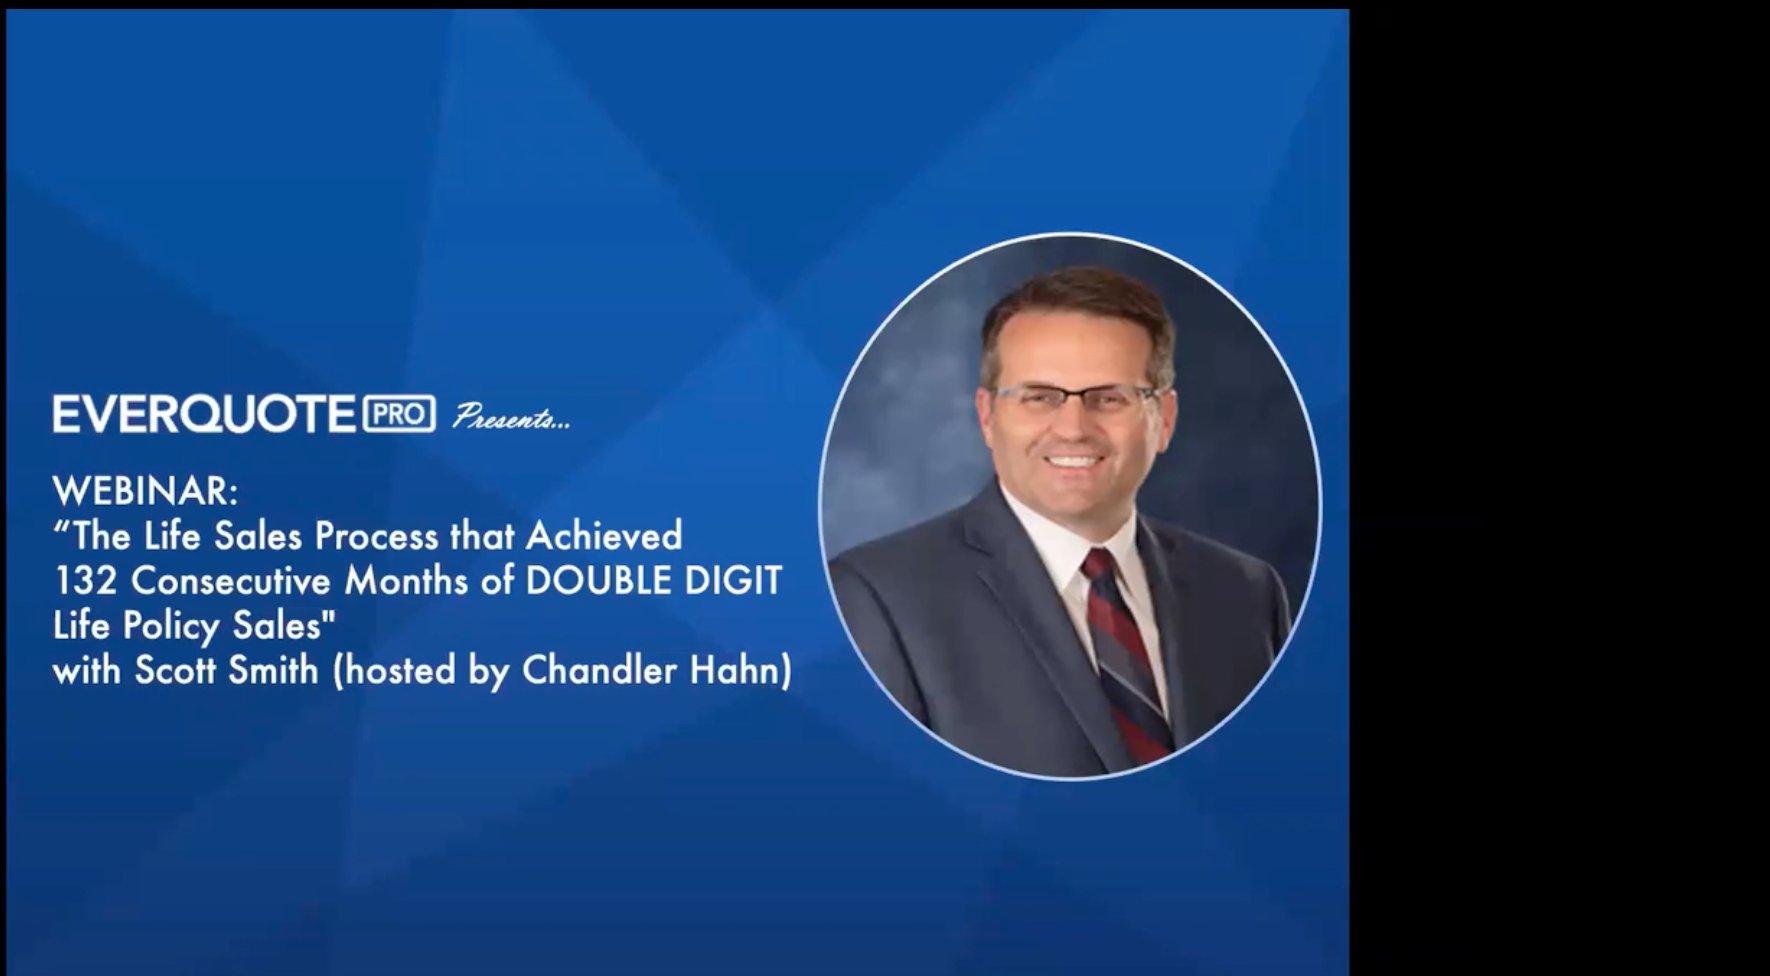 The Life Sales Process that Achieved 132 Consecutive Months of DOUBLE DIGIT Life Policy Sales with Scott Smith